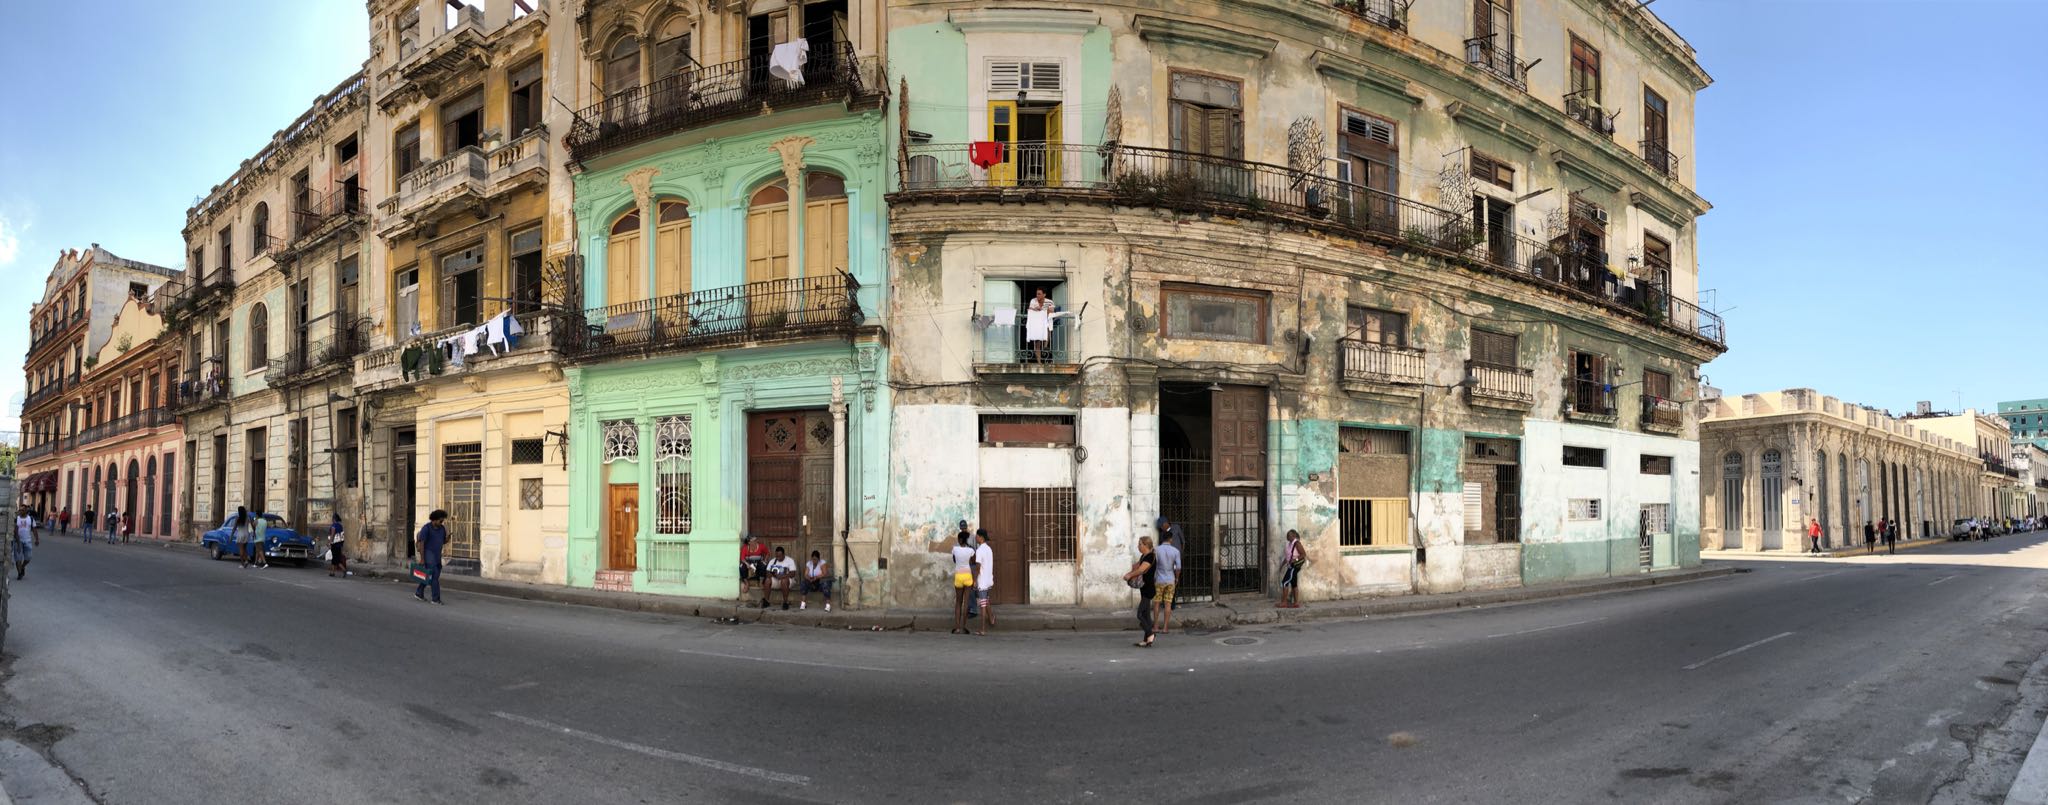 Photo 16 of 221 from the album Highlights Cuba 2019.